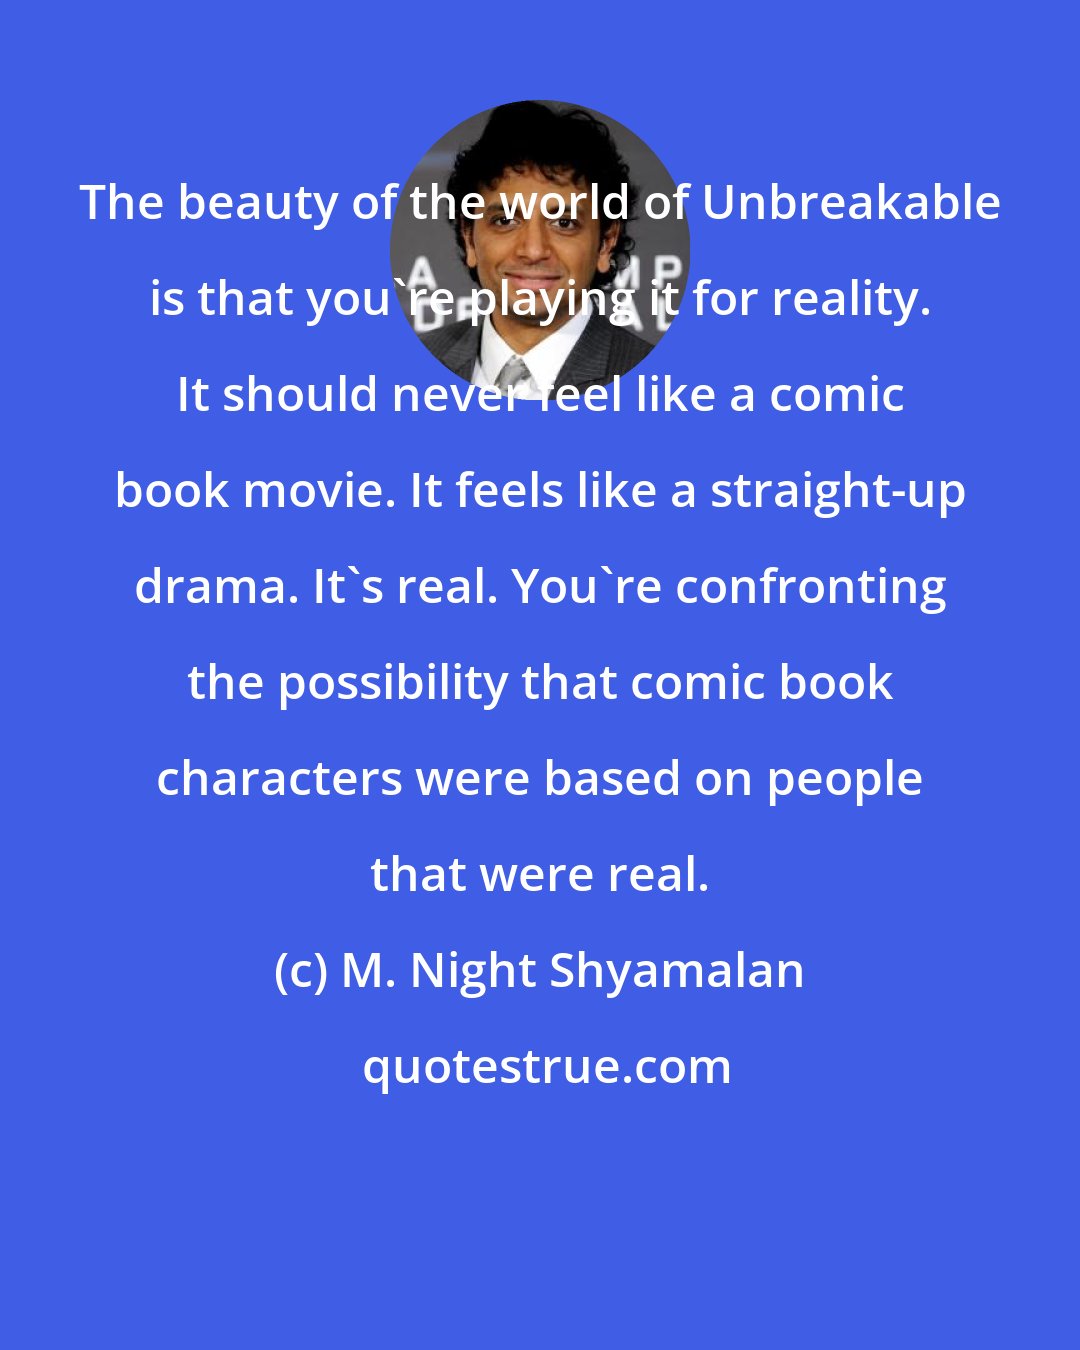 M. Night Shyamalan: The beauty of the world of Unbreakable is that you're playing it for reality. It should never feel like a comic book movie. It feels like a straight-up drama. It's real. You're confronting the possibility that comic book characters were based on people that were real.